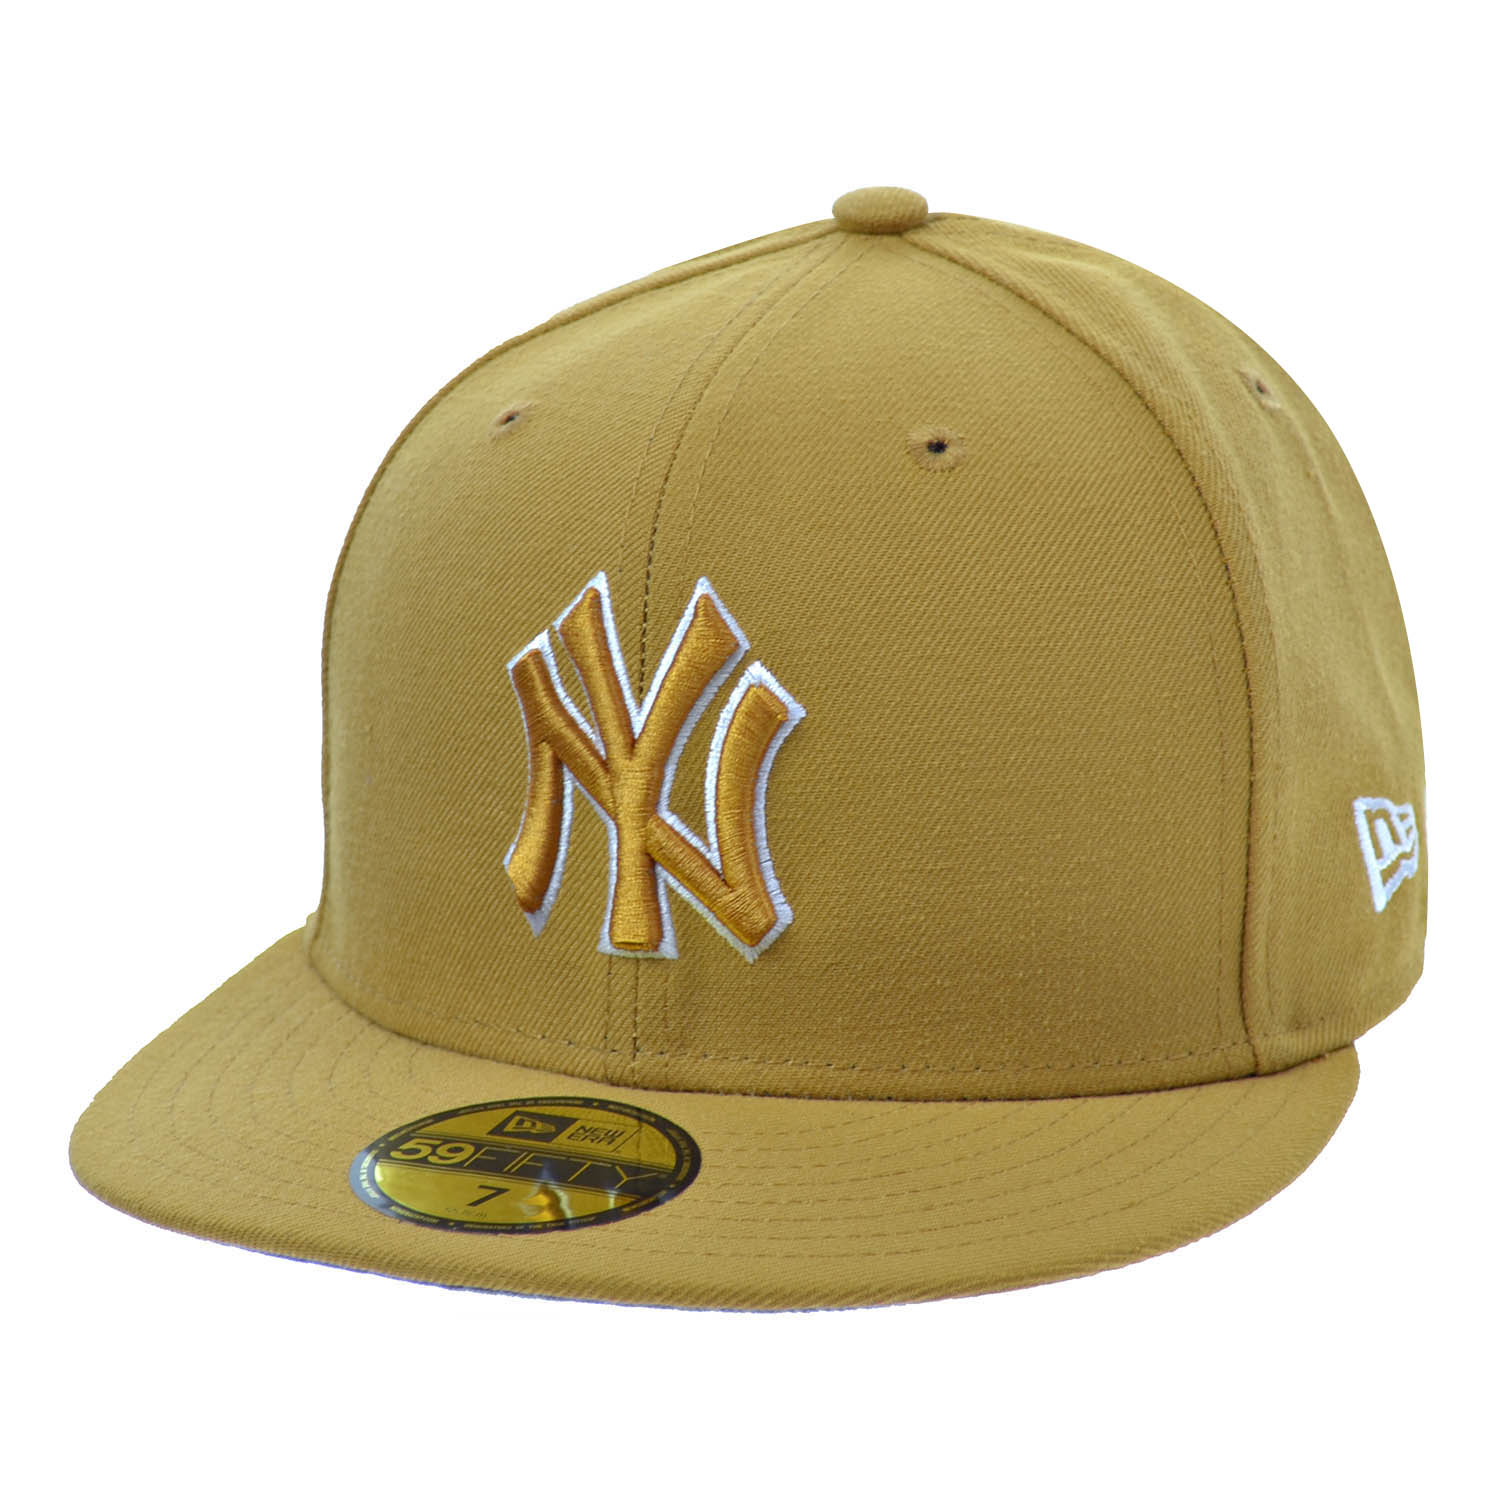 New Era New York Yankees 59Fifty Men's Fitted Hat Cap Wheat/White ...